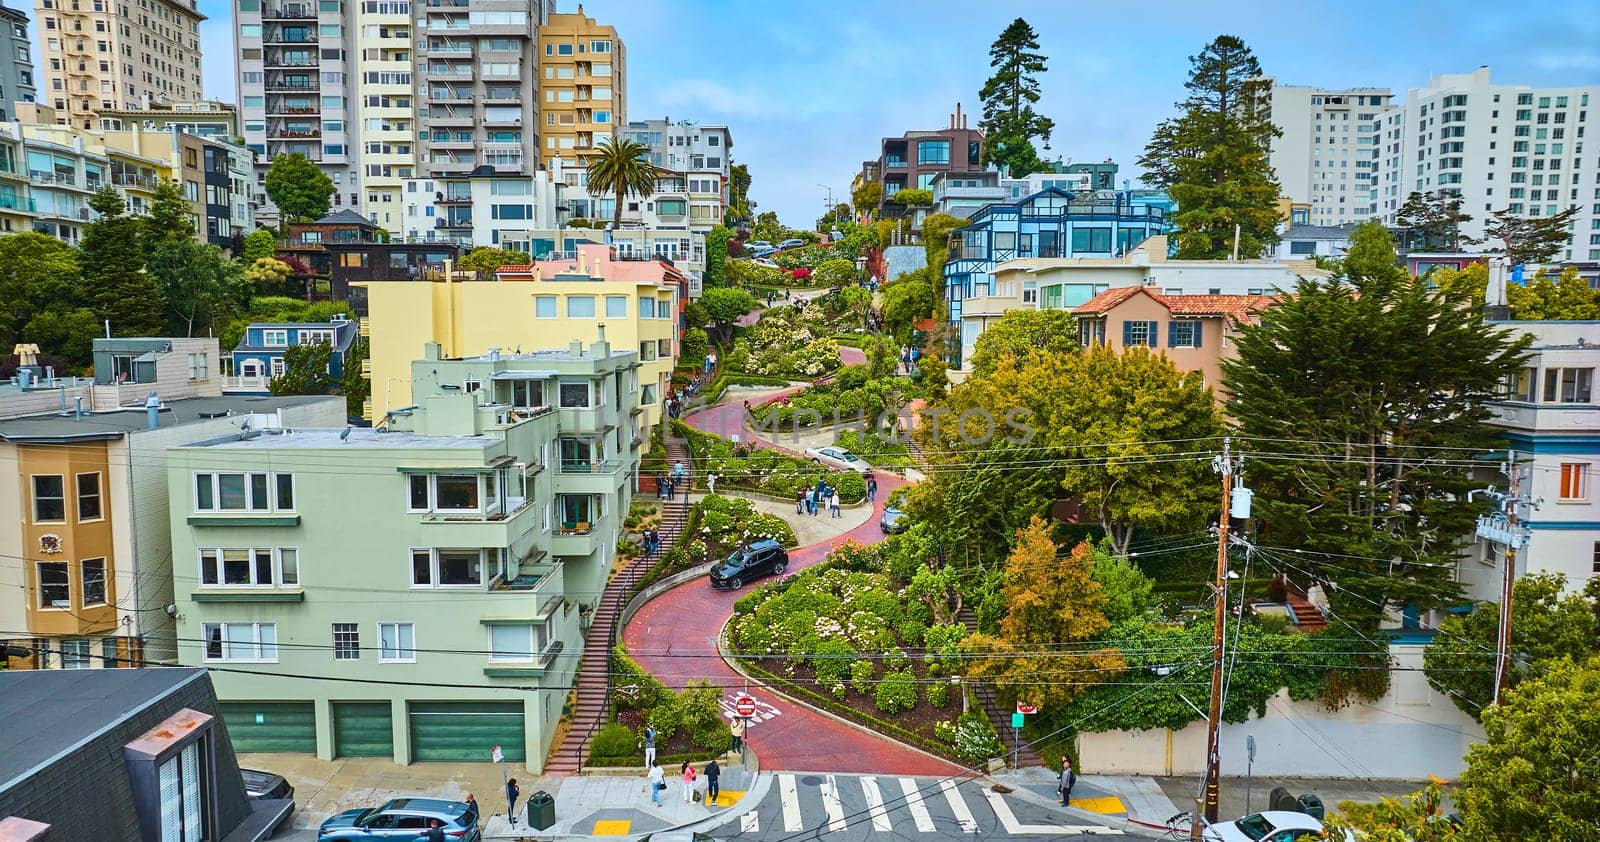 Image of Lower aerial angle on Lombard Street with cars and people coming down hill